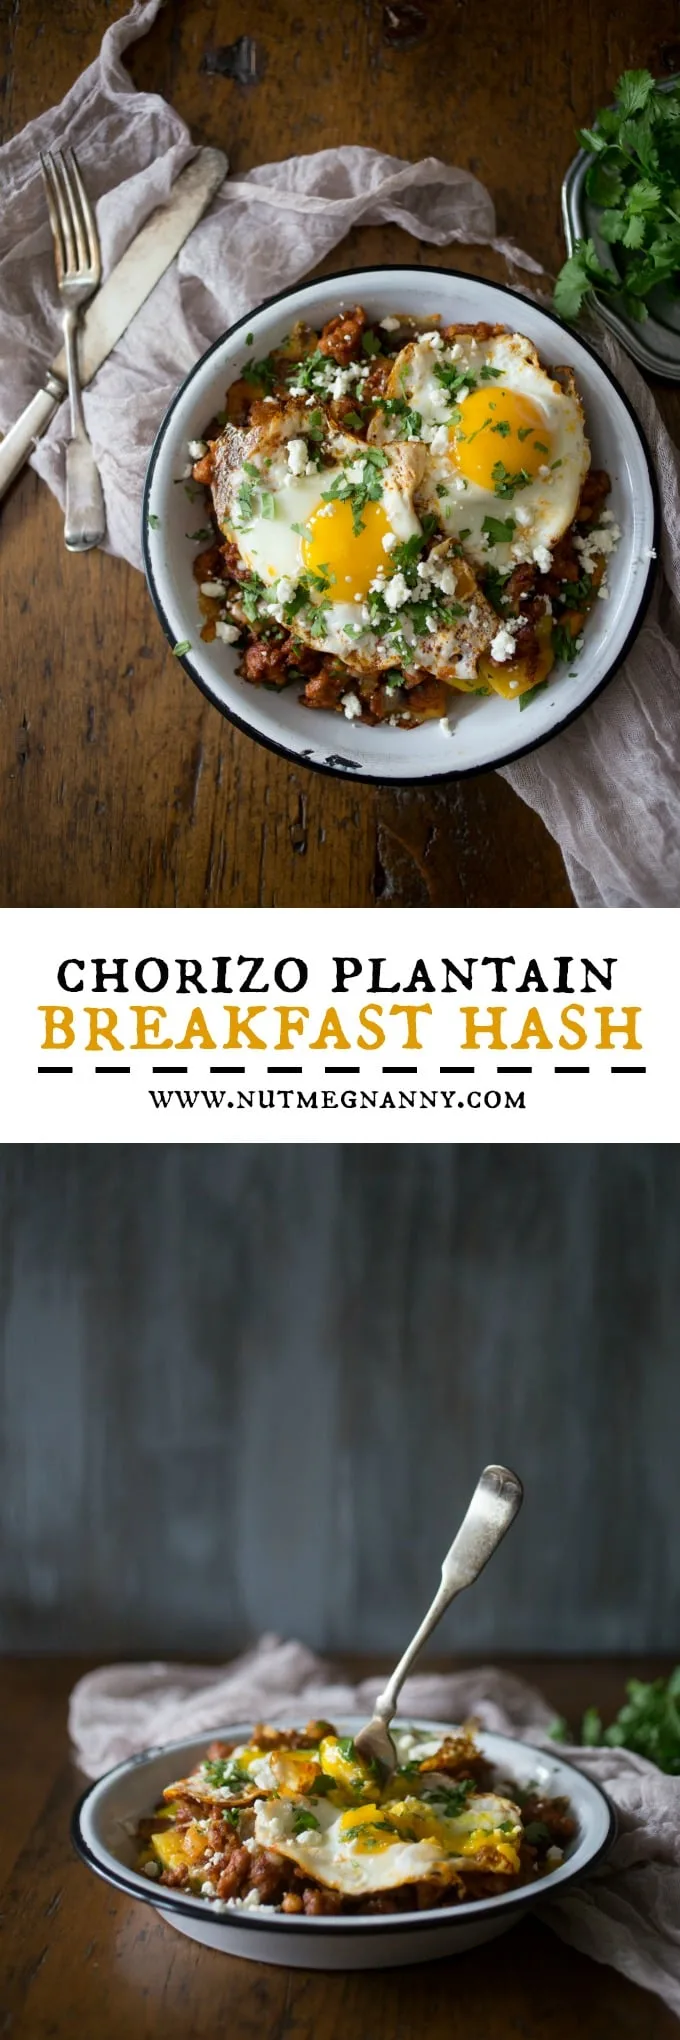 This chorizo plantain breakfast hash is the most delicious way to start your day. Slight sweet and spicy and ready in just 30 minutes!